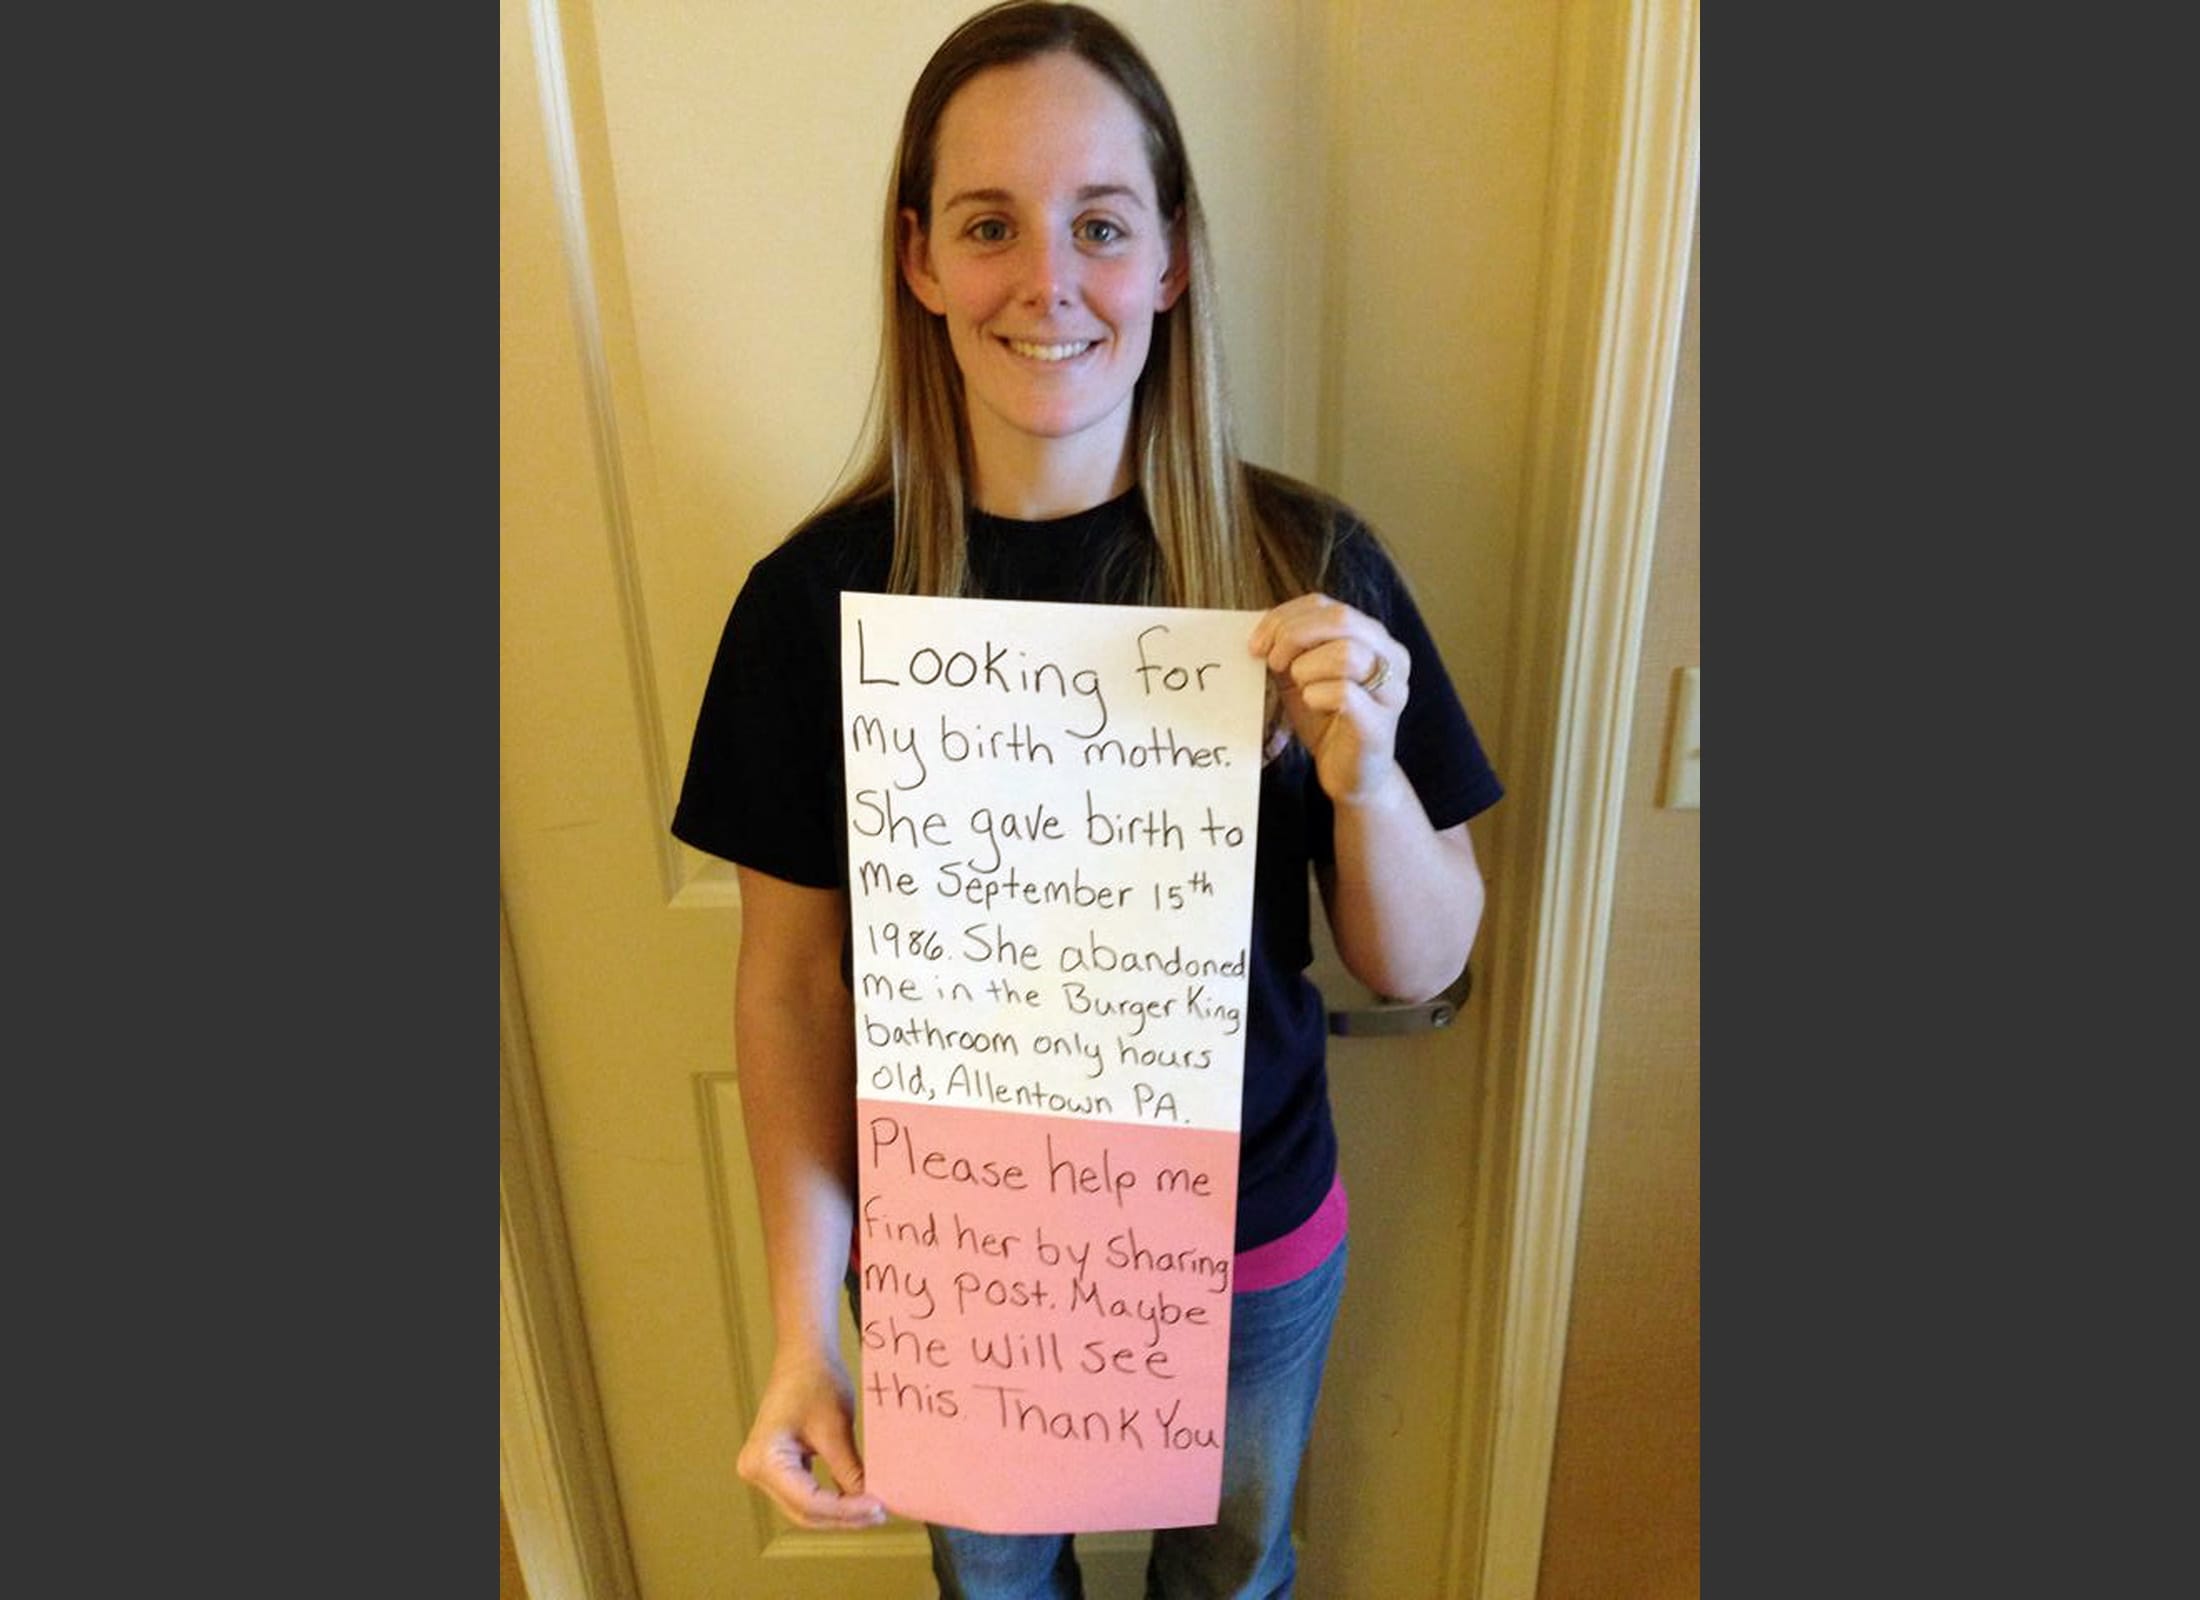 Katheryn Deprill is shown in a March 2 photo that she posted on Facebook holding a sign that says she is seeking her birth mother. Deprill was abandoned in the bathroom of a Burger King restaurant in Allentown, Pa., when she was a few hours old. Deprill tells The Associated Press that she met her biological mother for the first time Monday in an attorney's office.